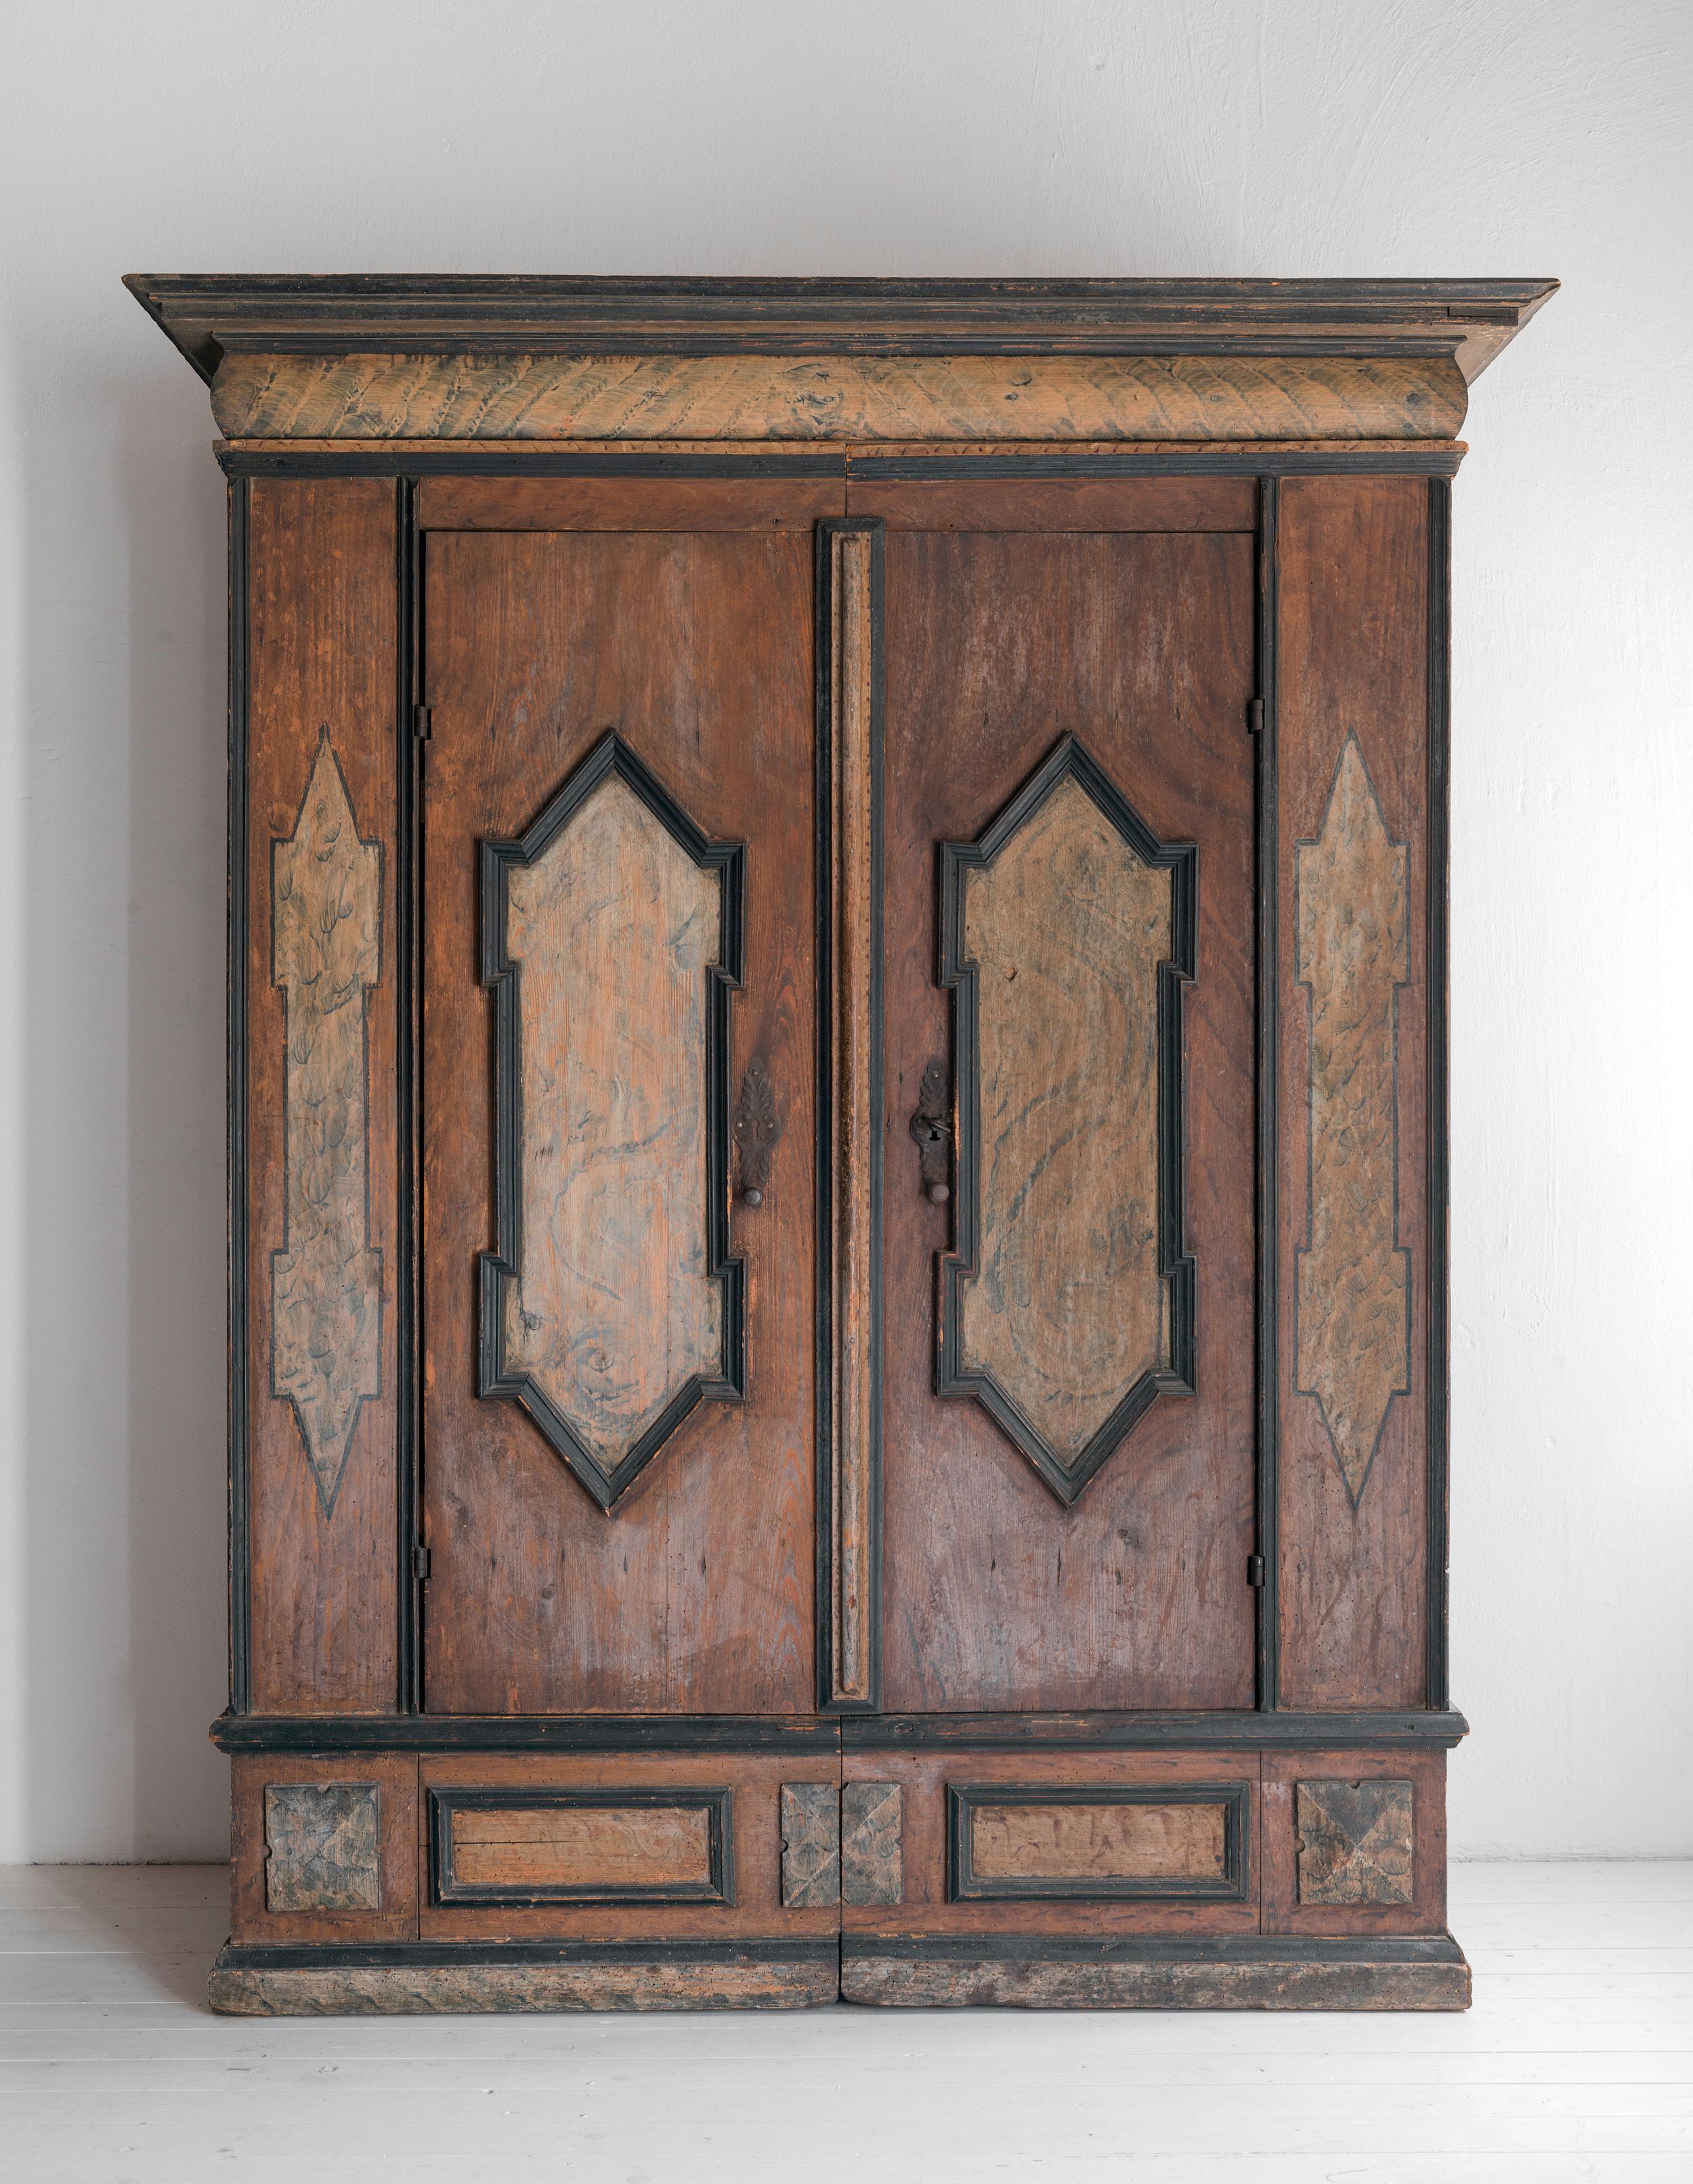 An exceptional 18th century Tuscan cabinet in original paint. Perfect in a hallway, office or dinign room. Wonderfull patina.